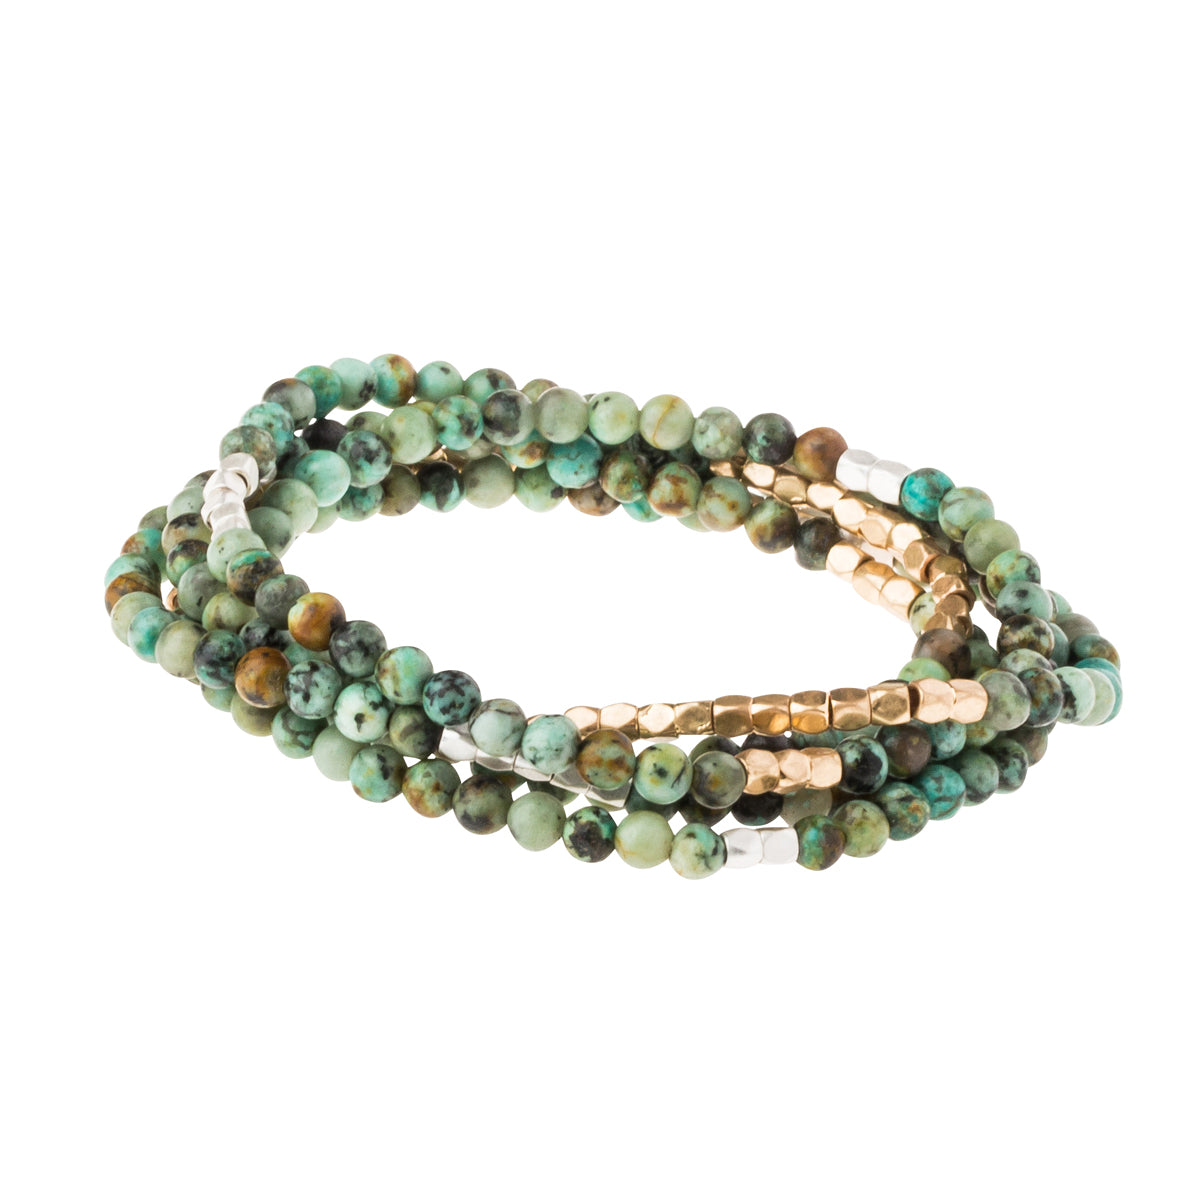 African Turquoise Bracelet 8mm - Remedywala